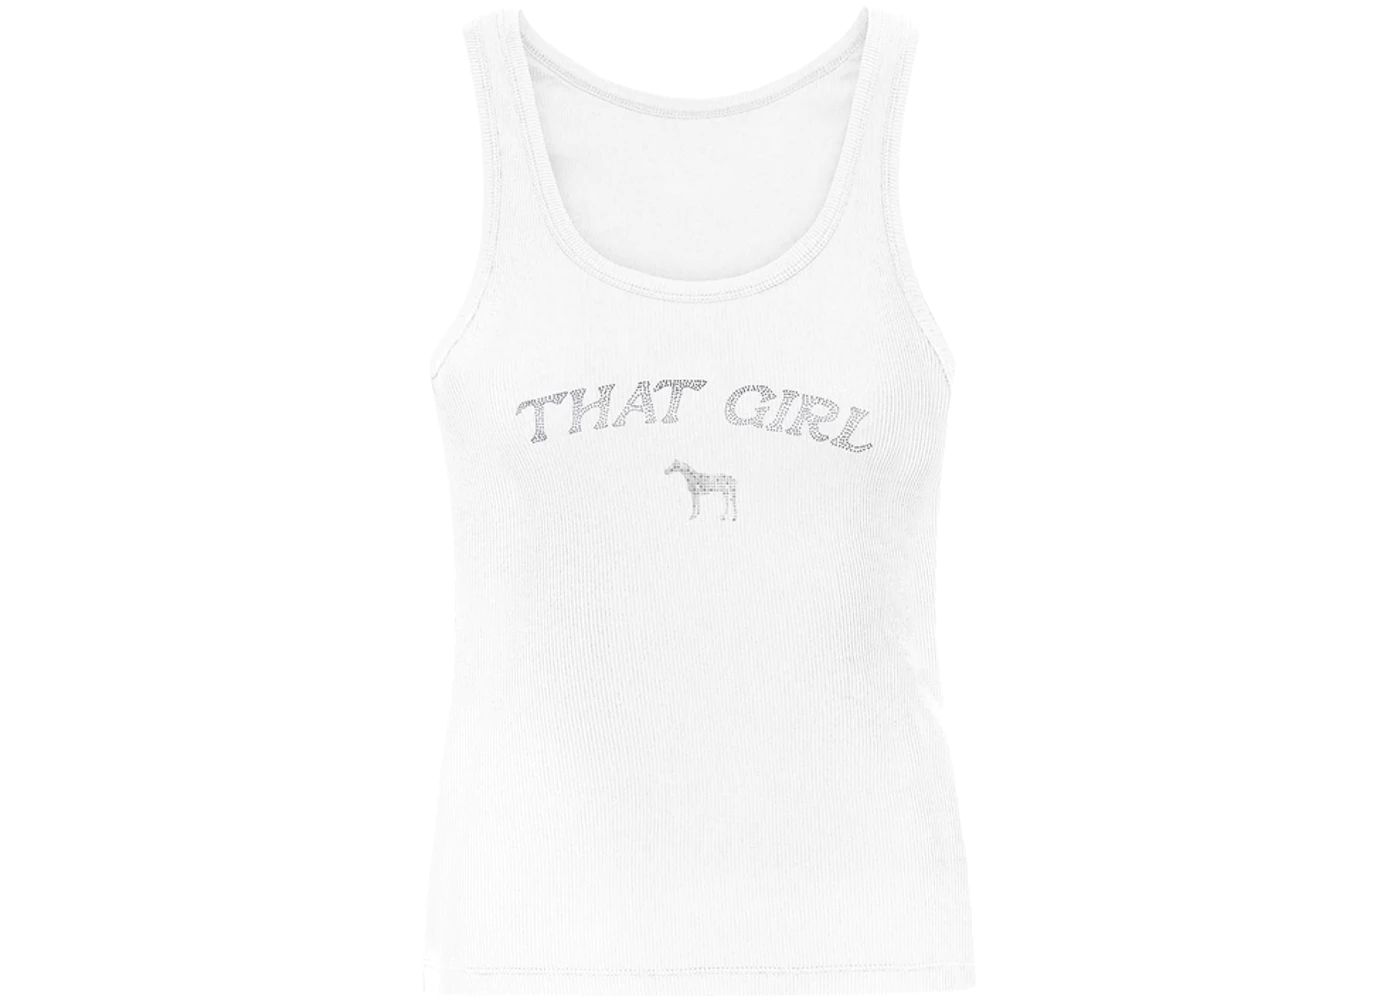 https://images.stockx.com/images/Beyonce-That-Girl-Rhinestone-Tank-White.png?fit=fill&bg=FFFFFF&w=700&h=500&fm=webp&auto=compress&q=90&dpr=2&trim=color&updated_at=1659482854